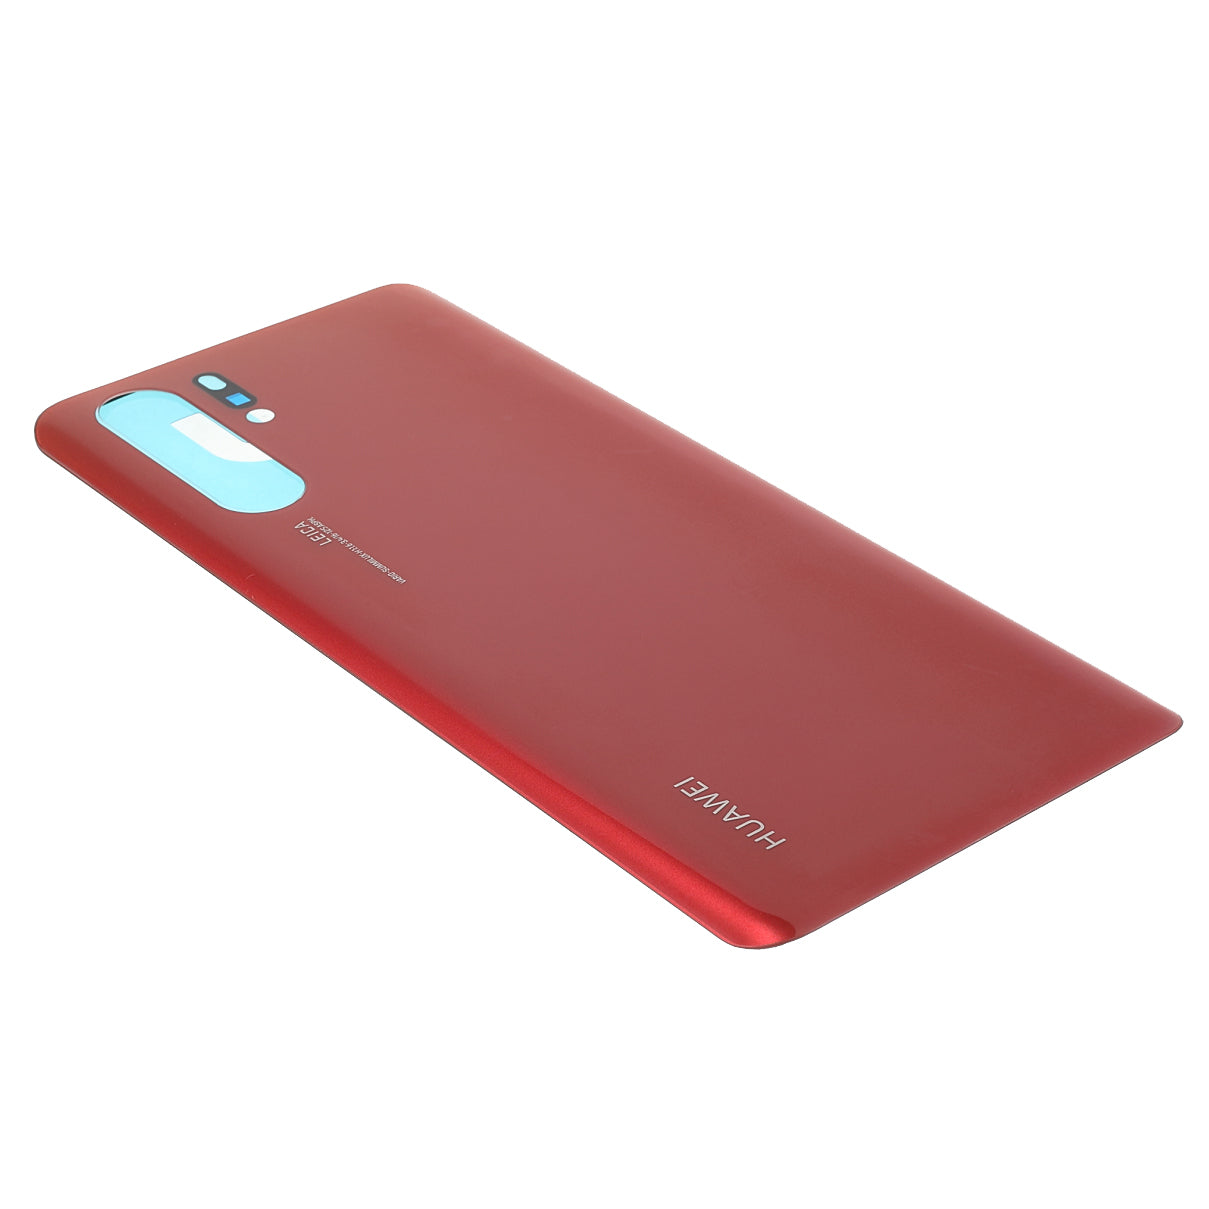 Battery Housing Door Cover Replacement for Huawei P30 Pro - Amber Sunrise